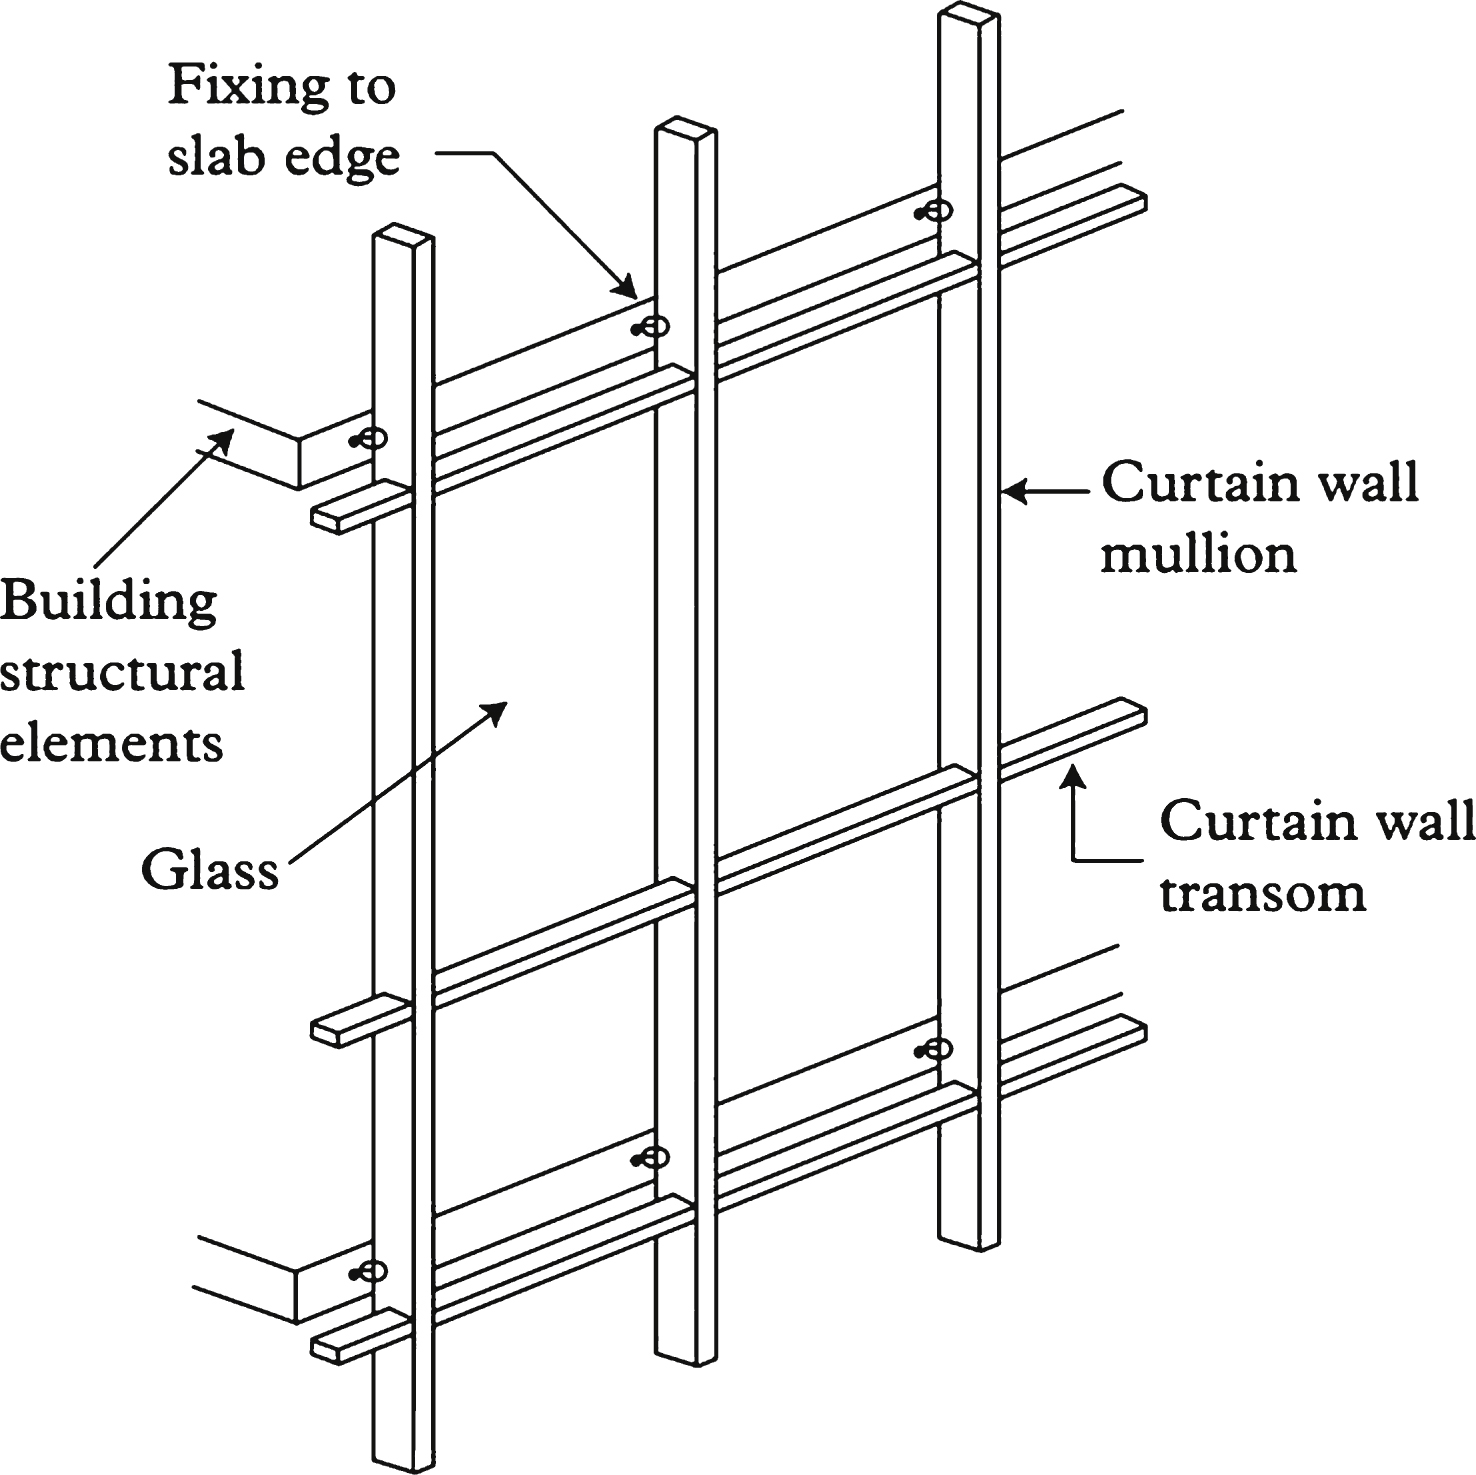 Main elements of curtain wall.